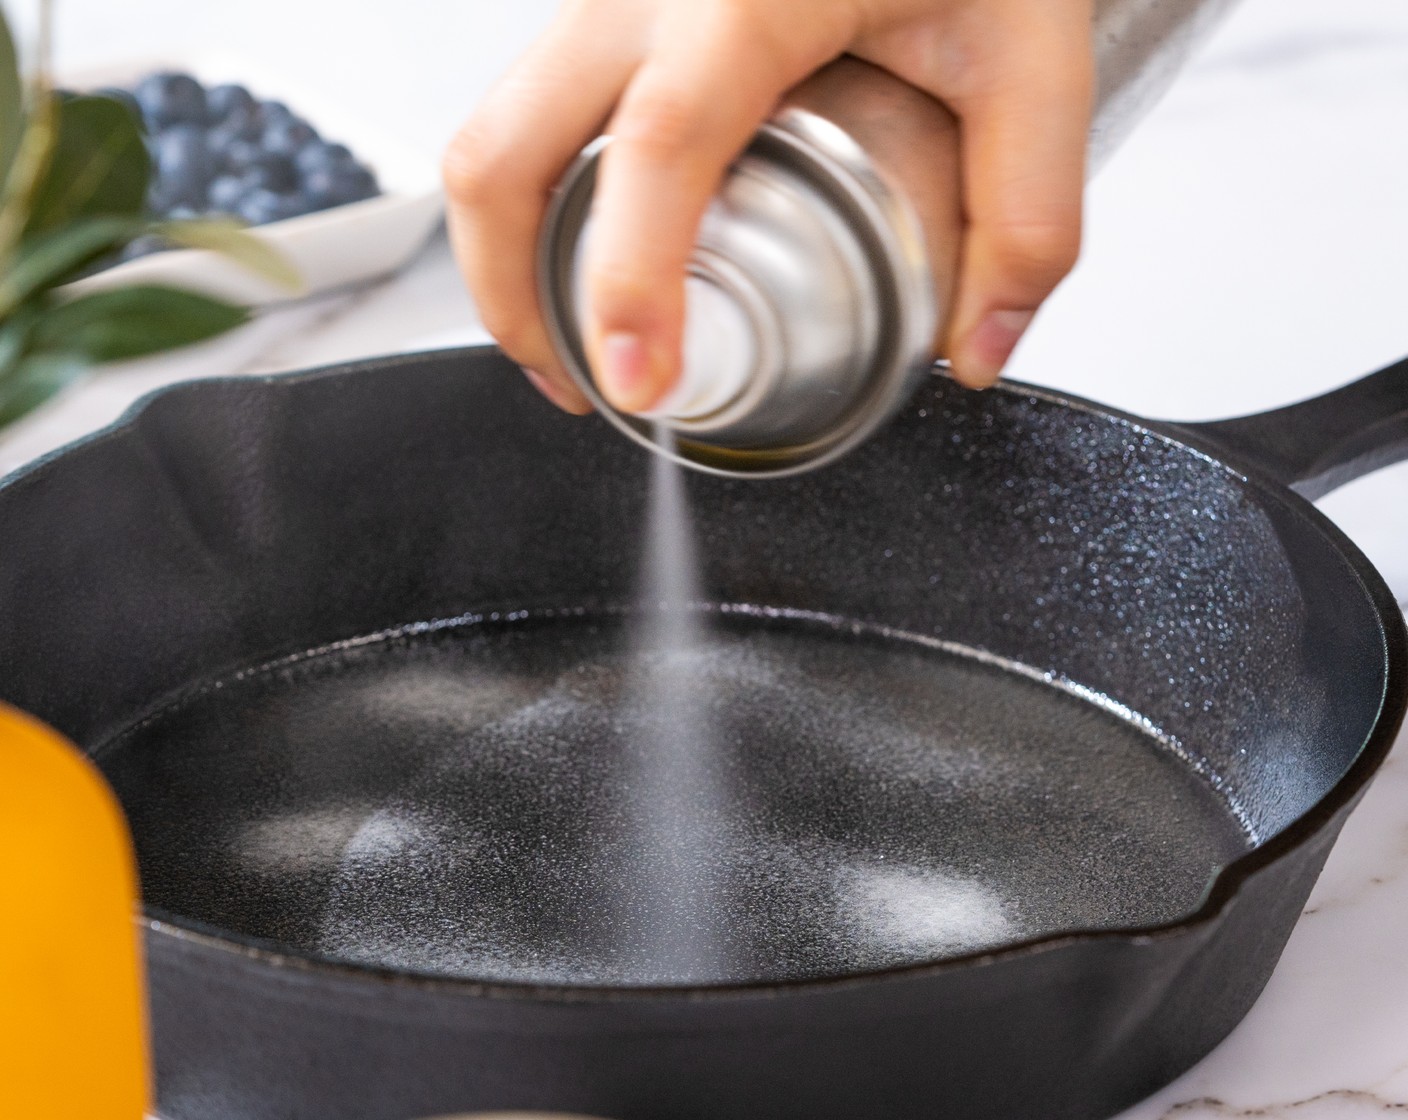 step 1 Preheat the oven to 400 degrees F (200 degrees C). Grease the skillet with Non-Stick Baking Spray (as needed).